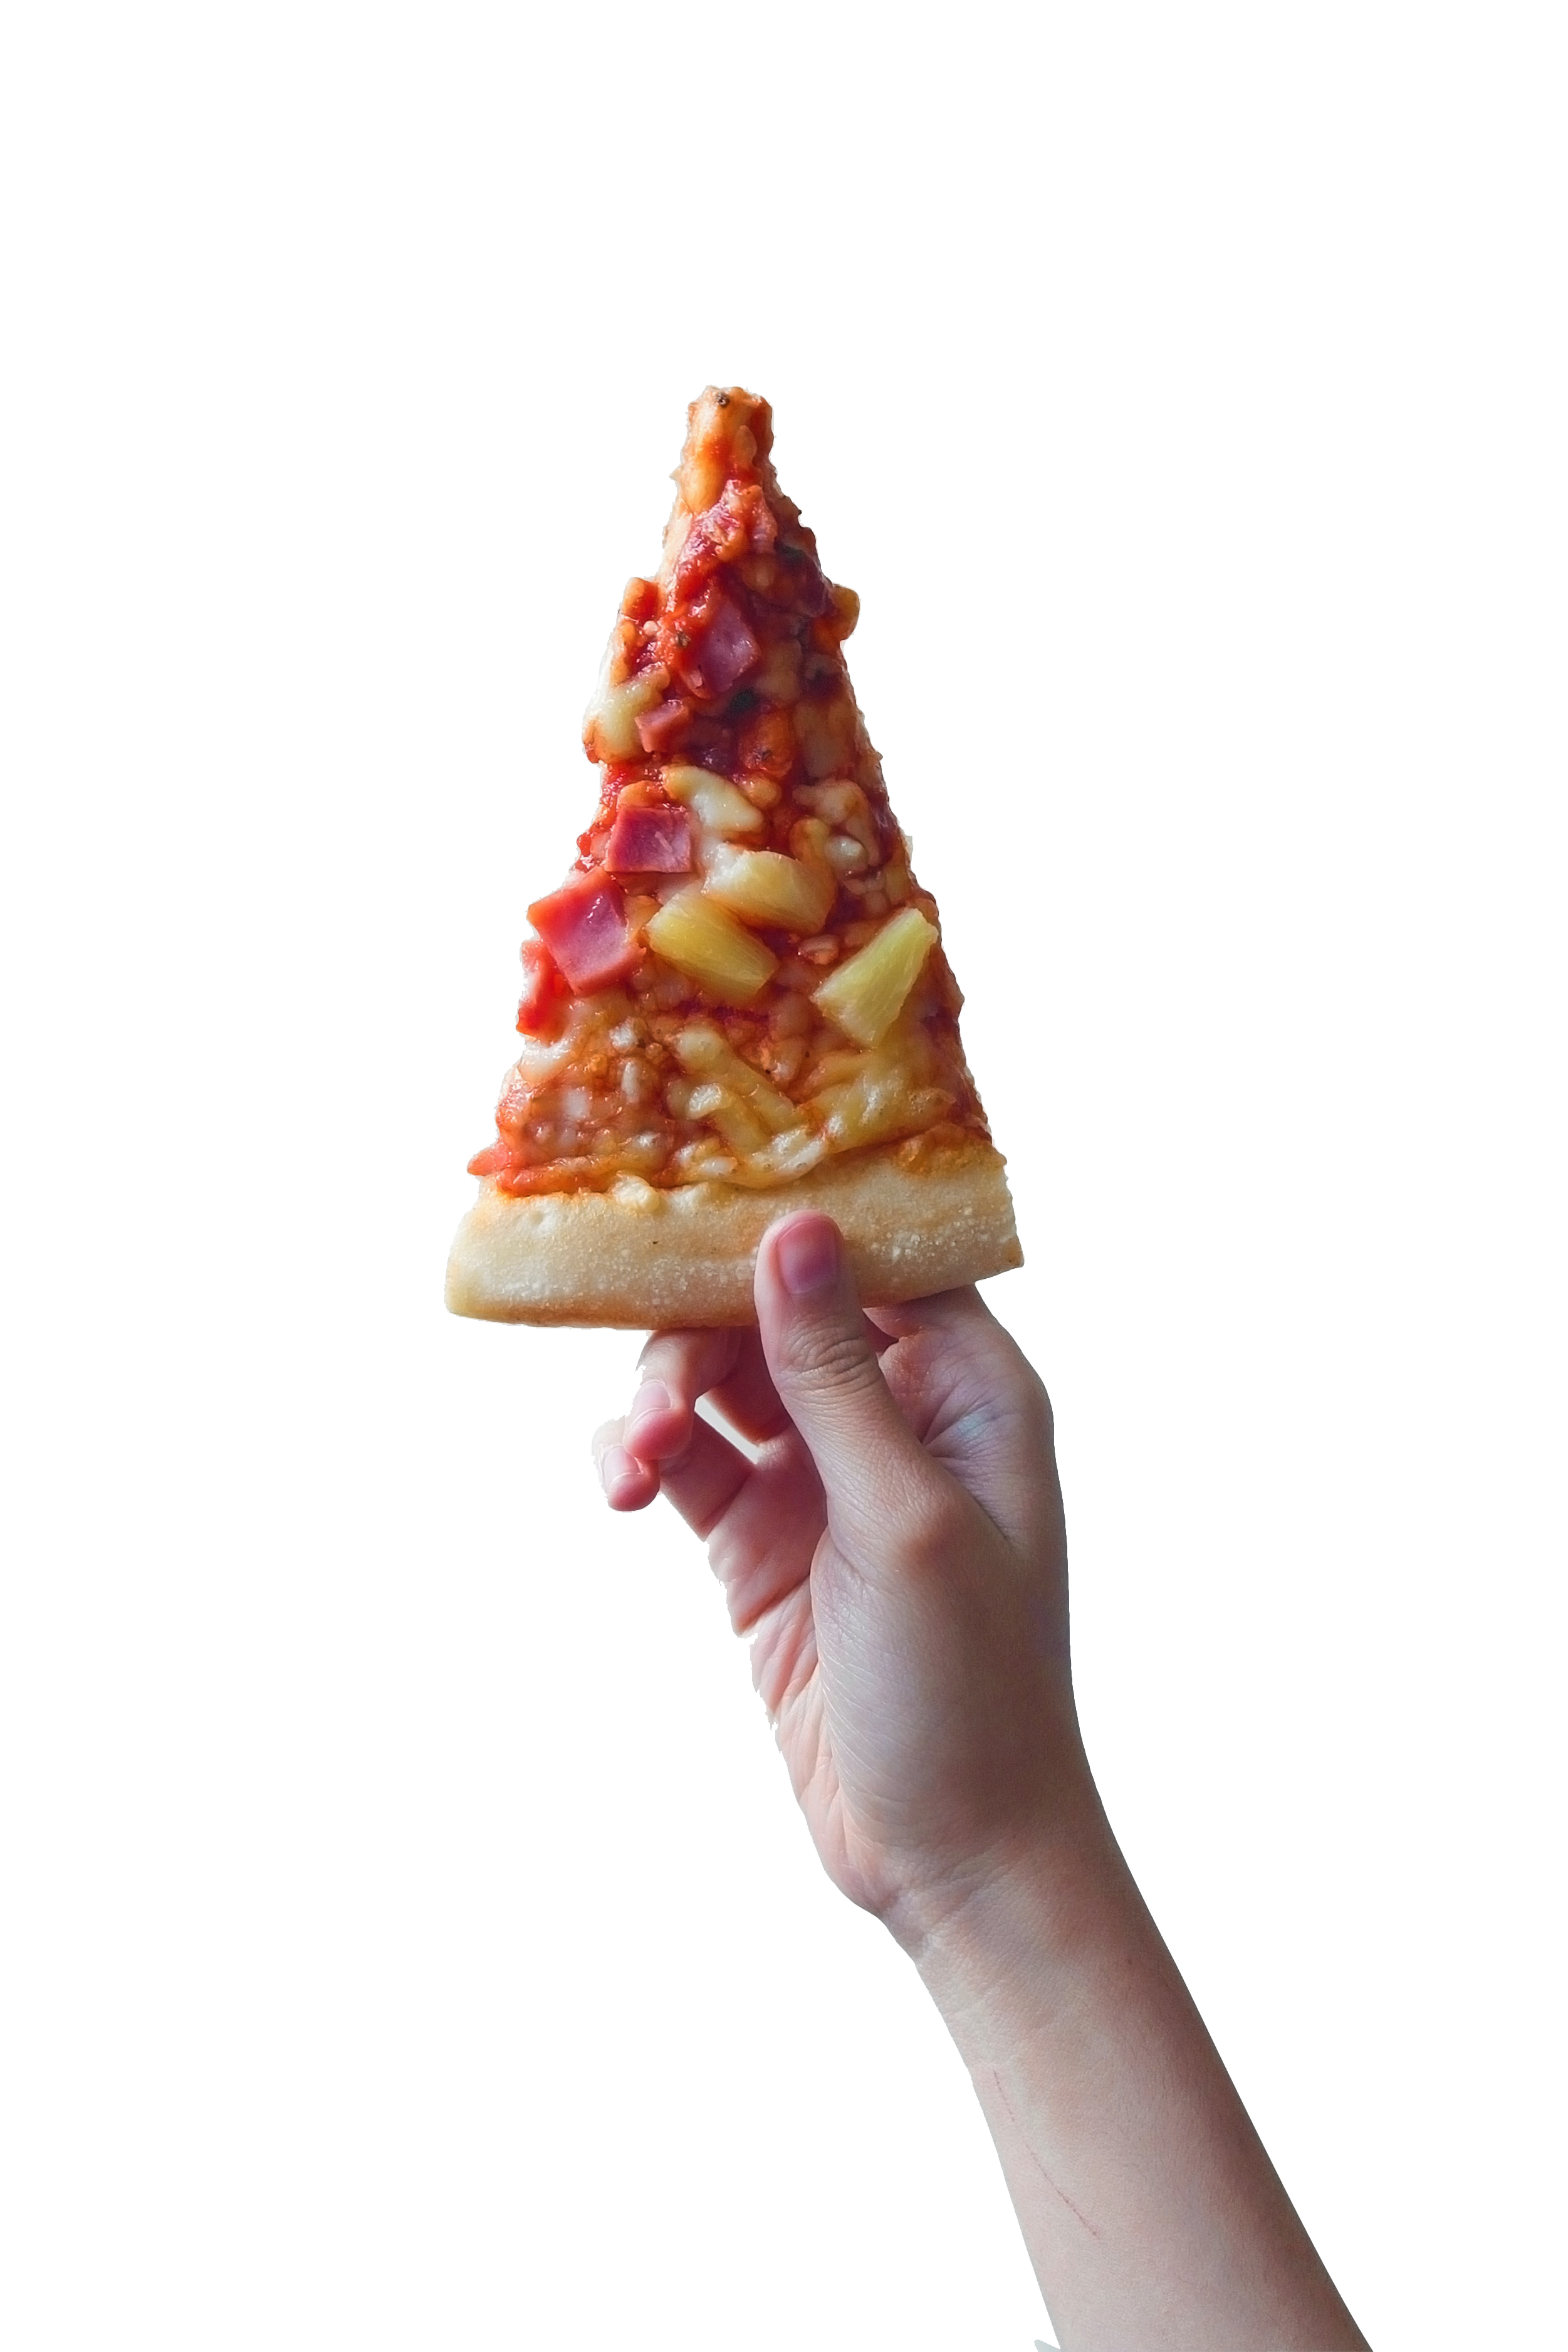 hand holding piece of pineapple pizza